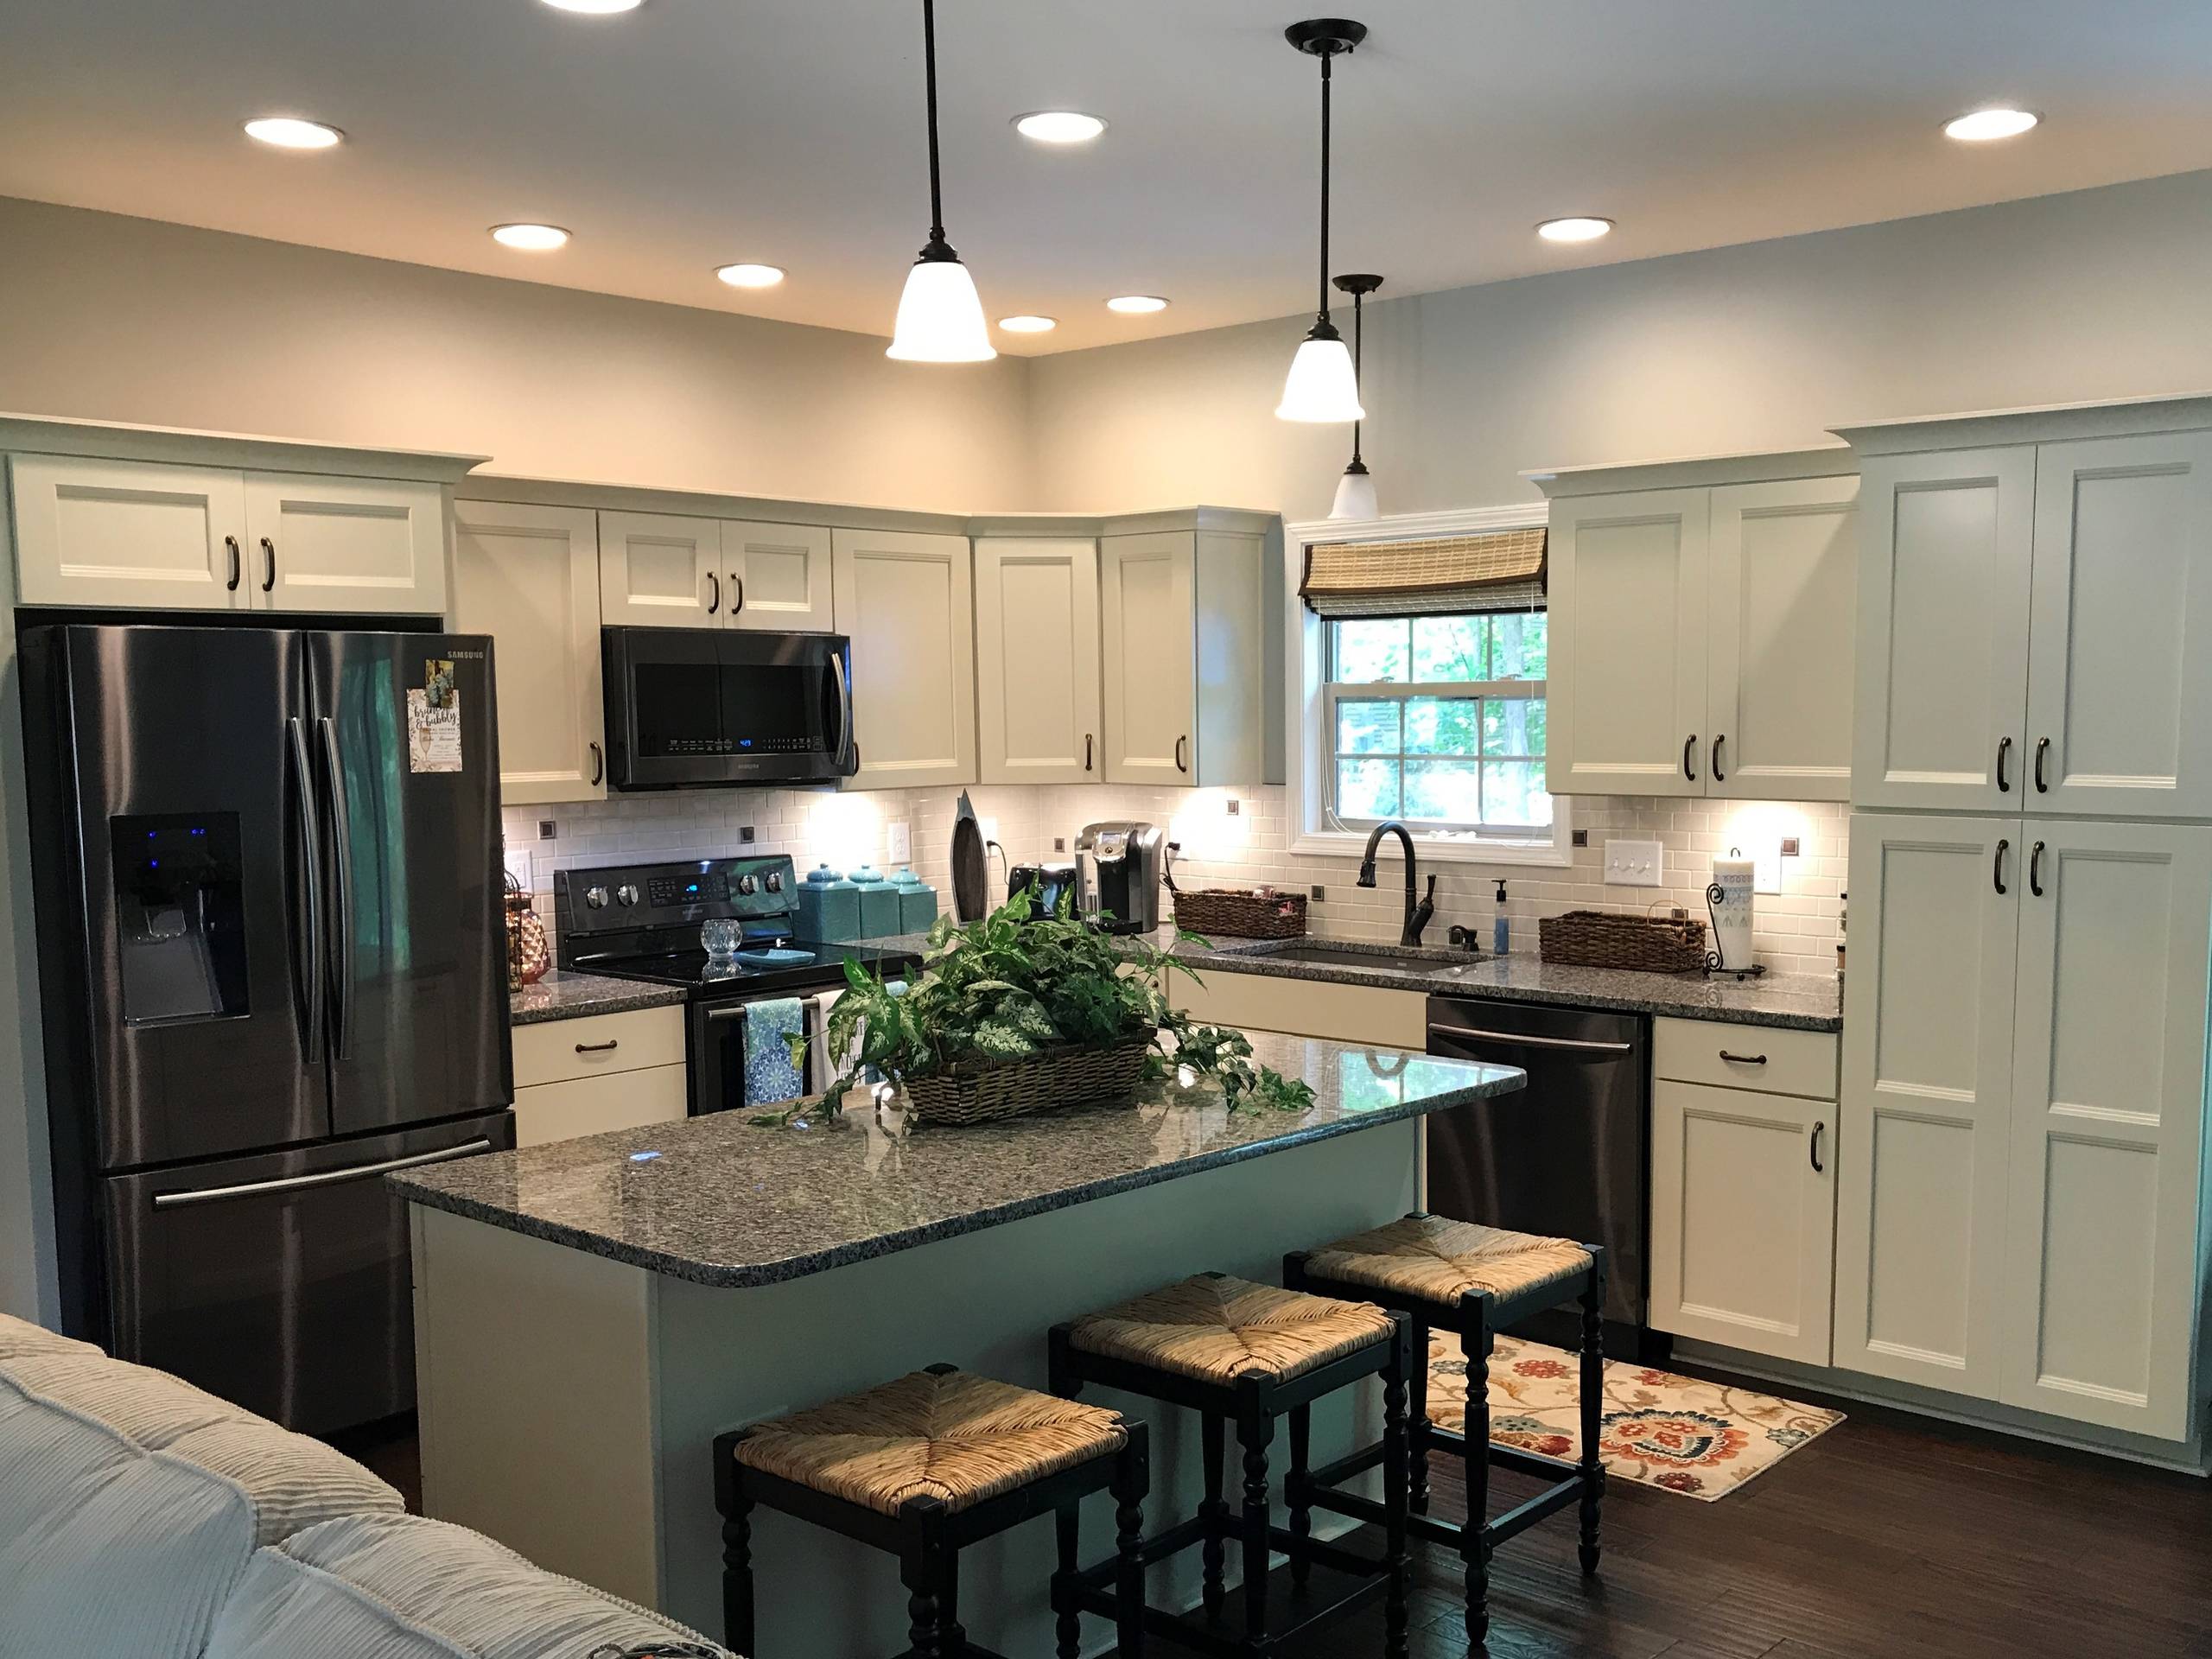 Waypoint And Contractors Choice Cabinetry Painted Silk Kitchen Indianapolis By Concepts The Cabinet Shop Houzz